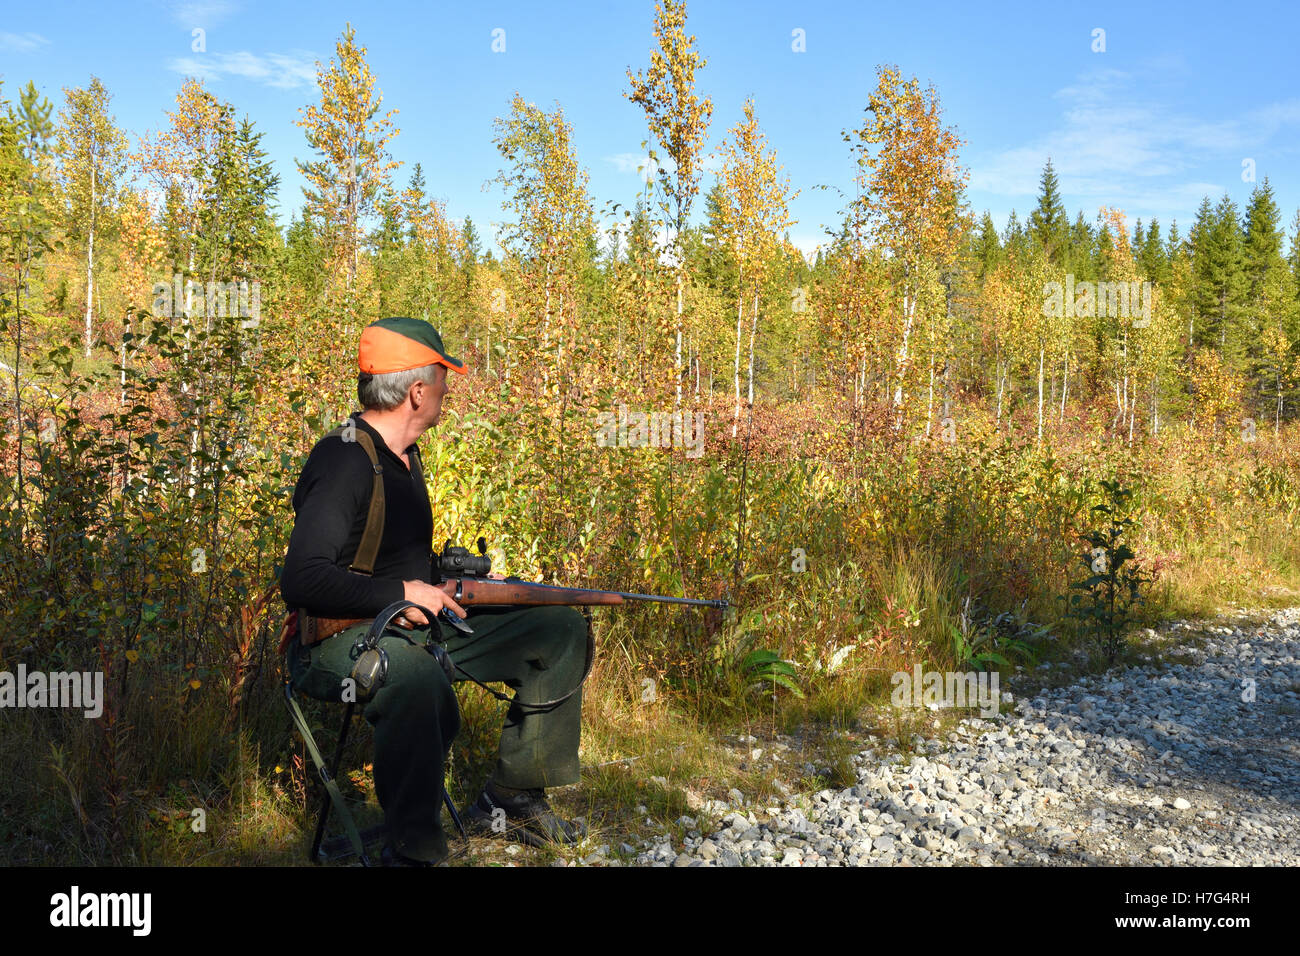 Moose hunter with orange cap sitting on a chair holding a rifle, picture from the North of Sweden. Stock Photo